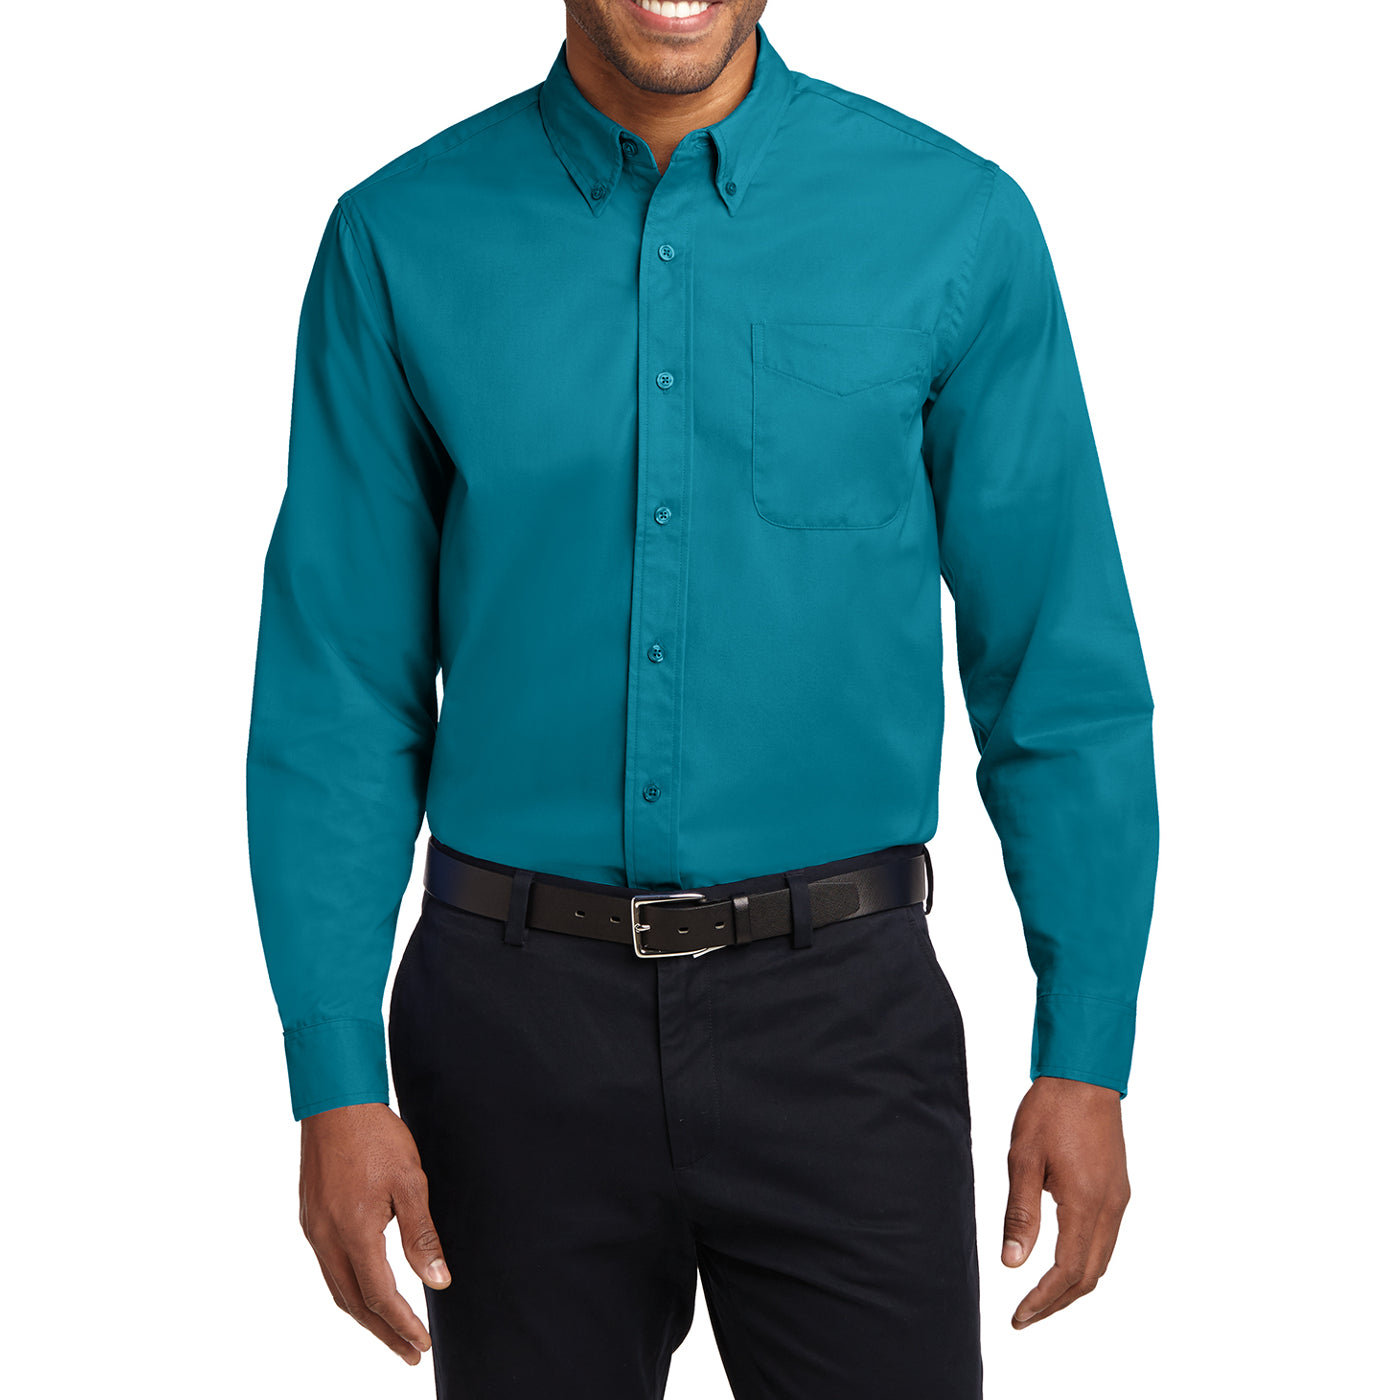 Men's Long Sleeve Easy Care Shirt - Teal Green - Front